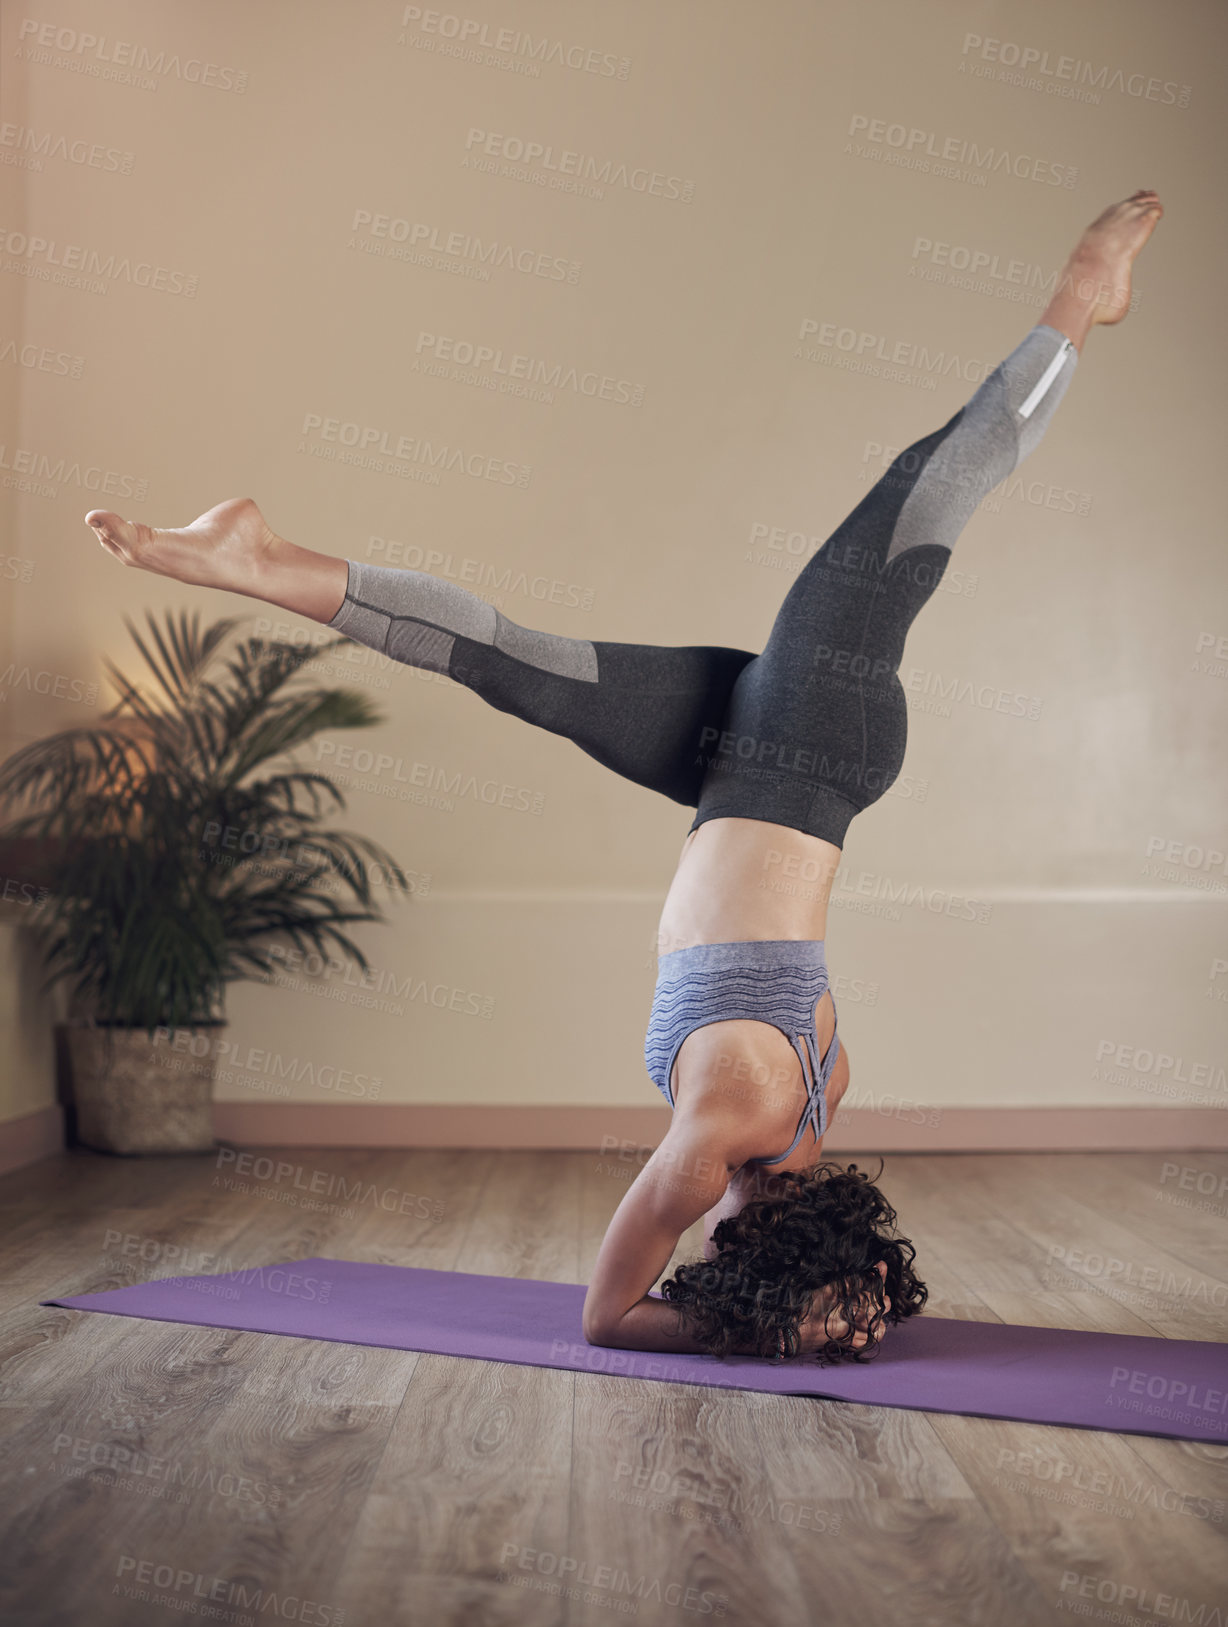 Buy stock photo Full length shot of an unrecognizable woman holding an elbow stand during an indoor yoga session alone